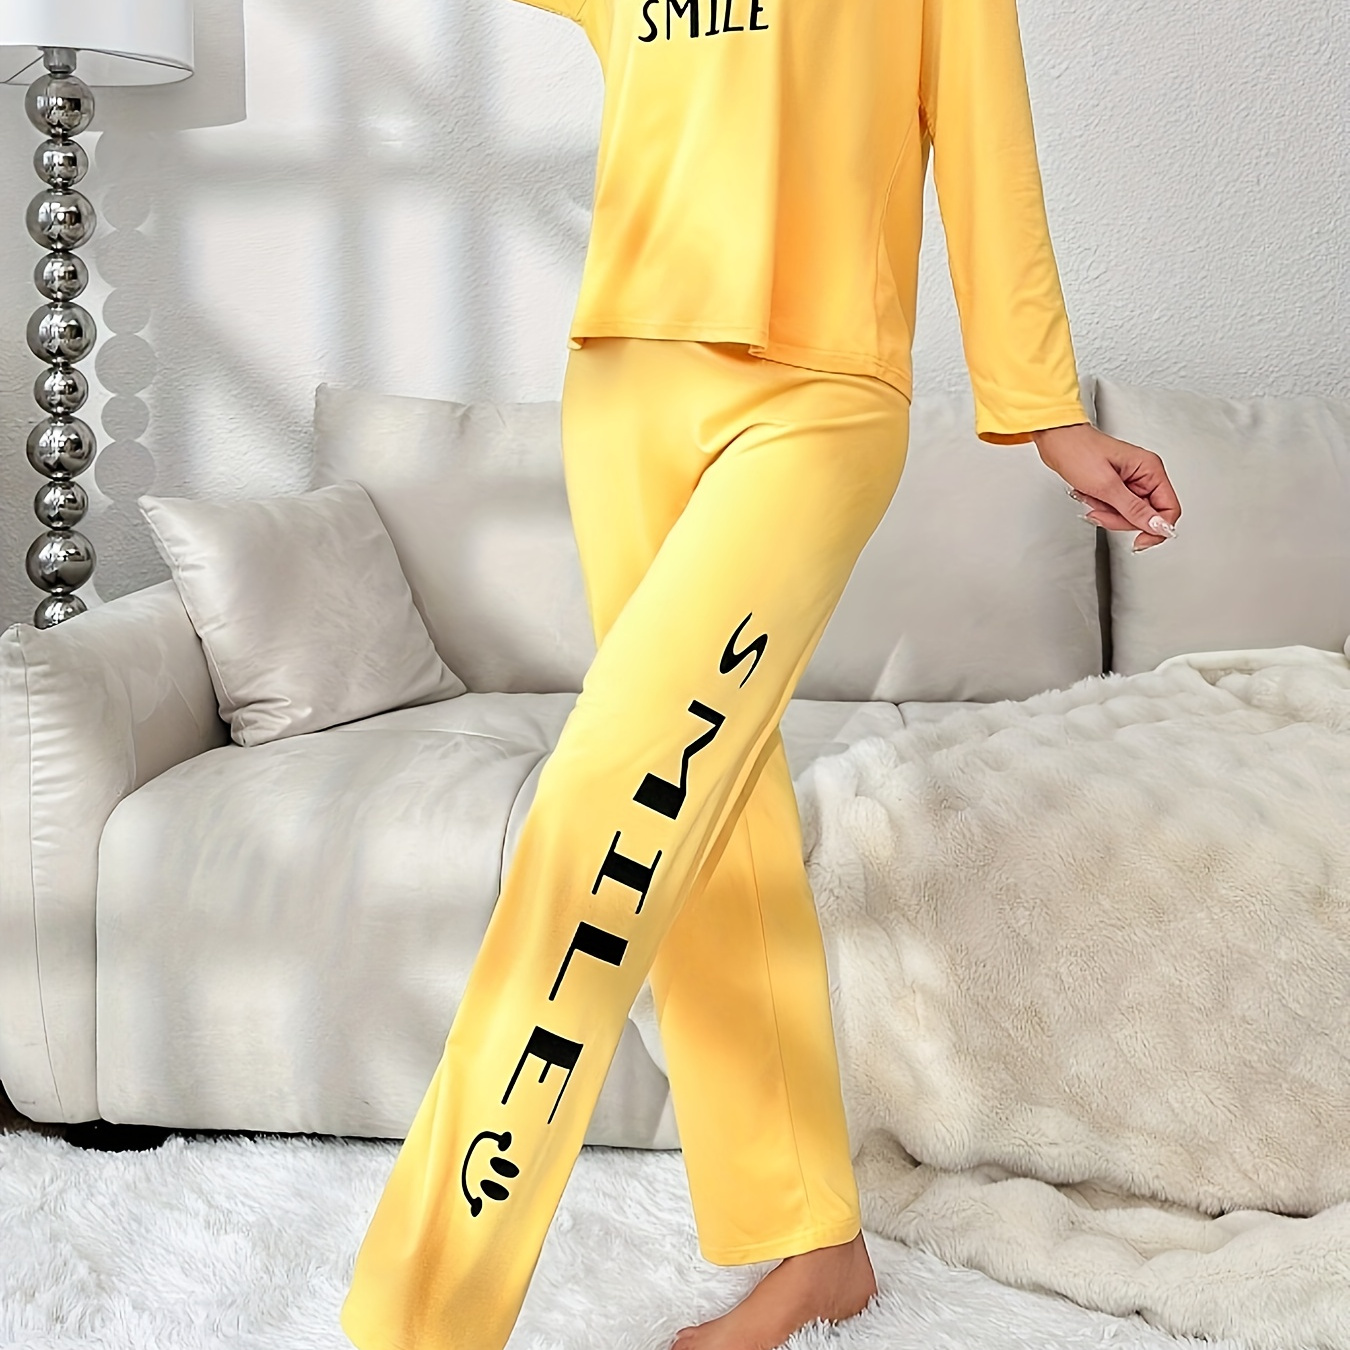 

Women's Smiling Face & Letter Print Casual Pajama Set, Long Sleeve Round Neck Top & Pants, Comfortable Relaxed Fit For Fall